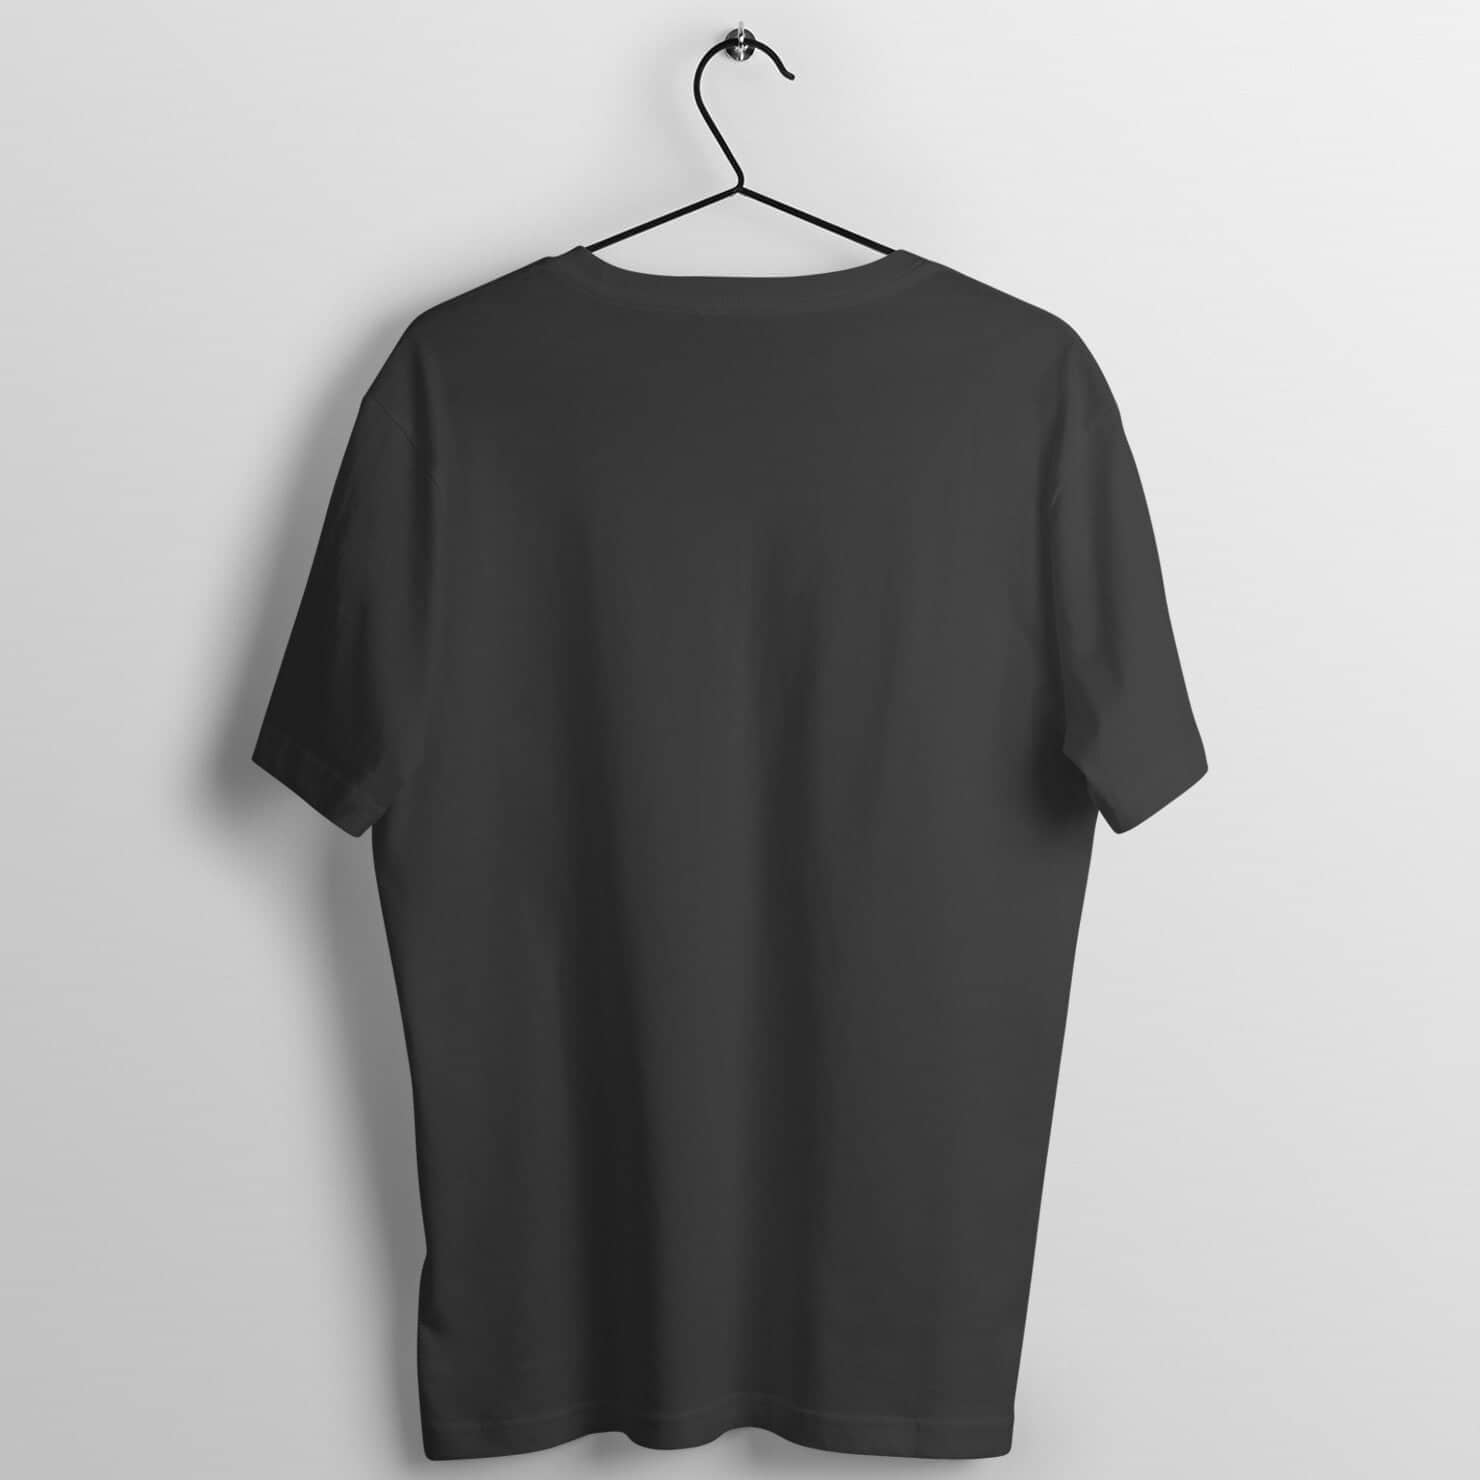 Champion Exclusive Black T Shirt for Men and Women Shirts & Tops Printrove 